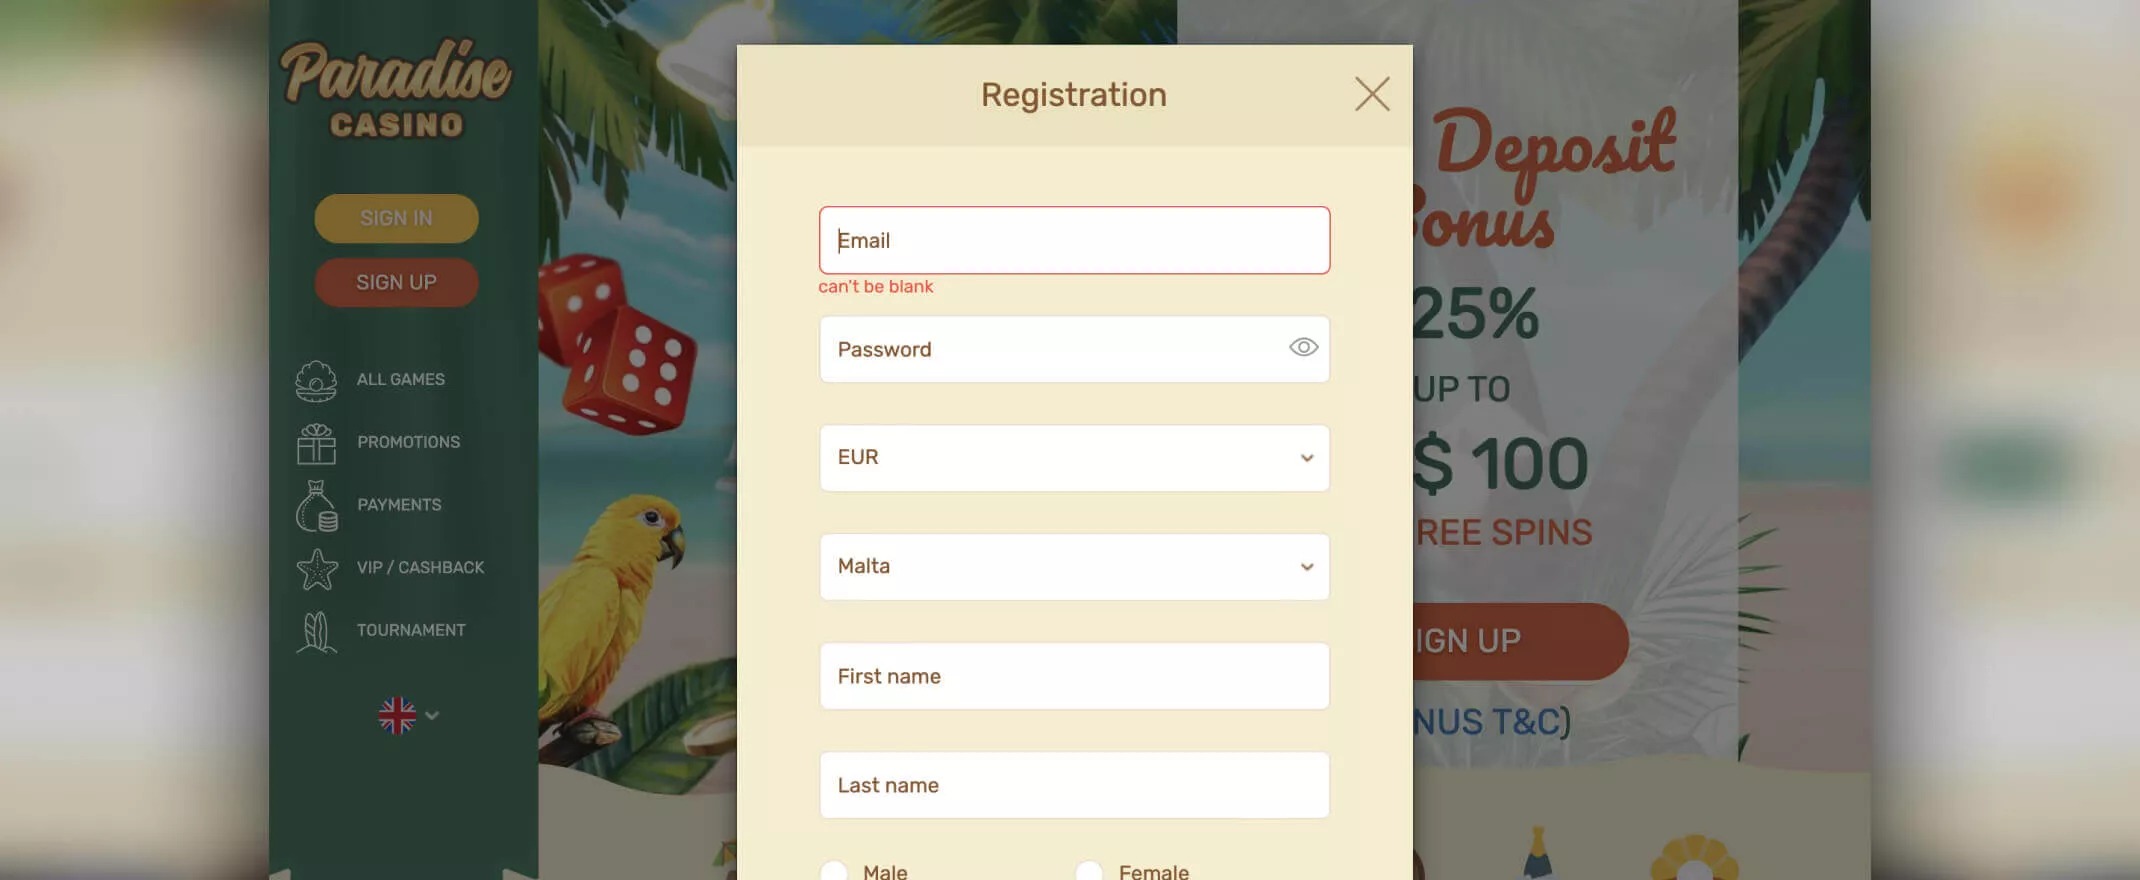 Paradise screenshot of the registration page